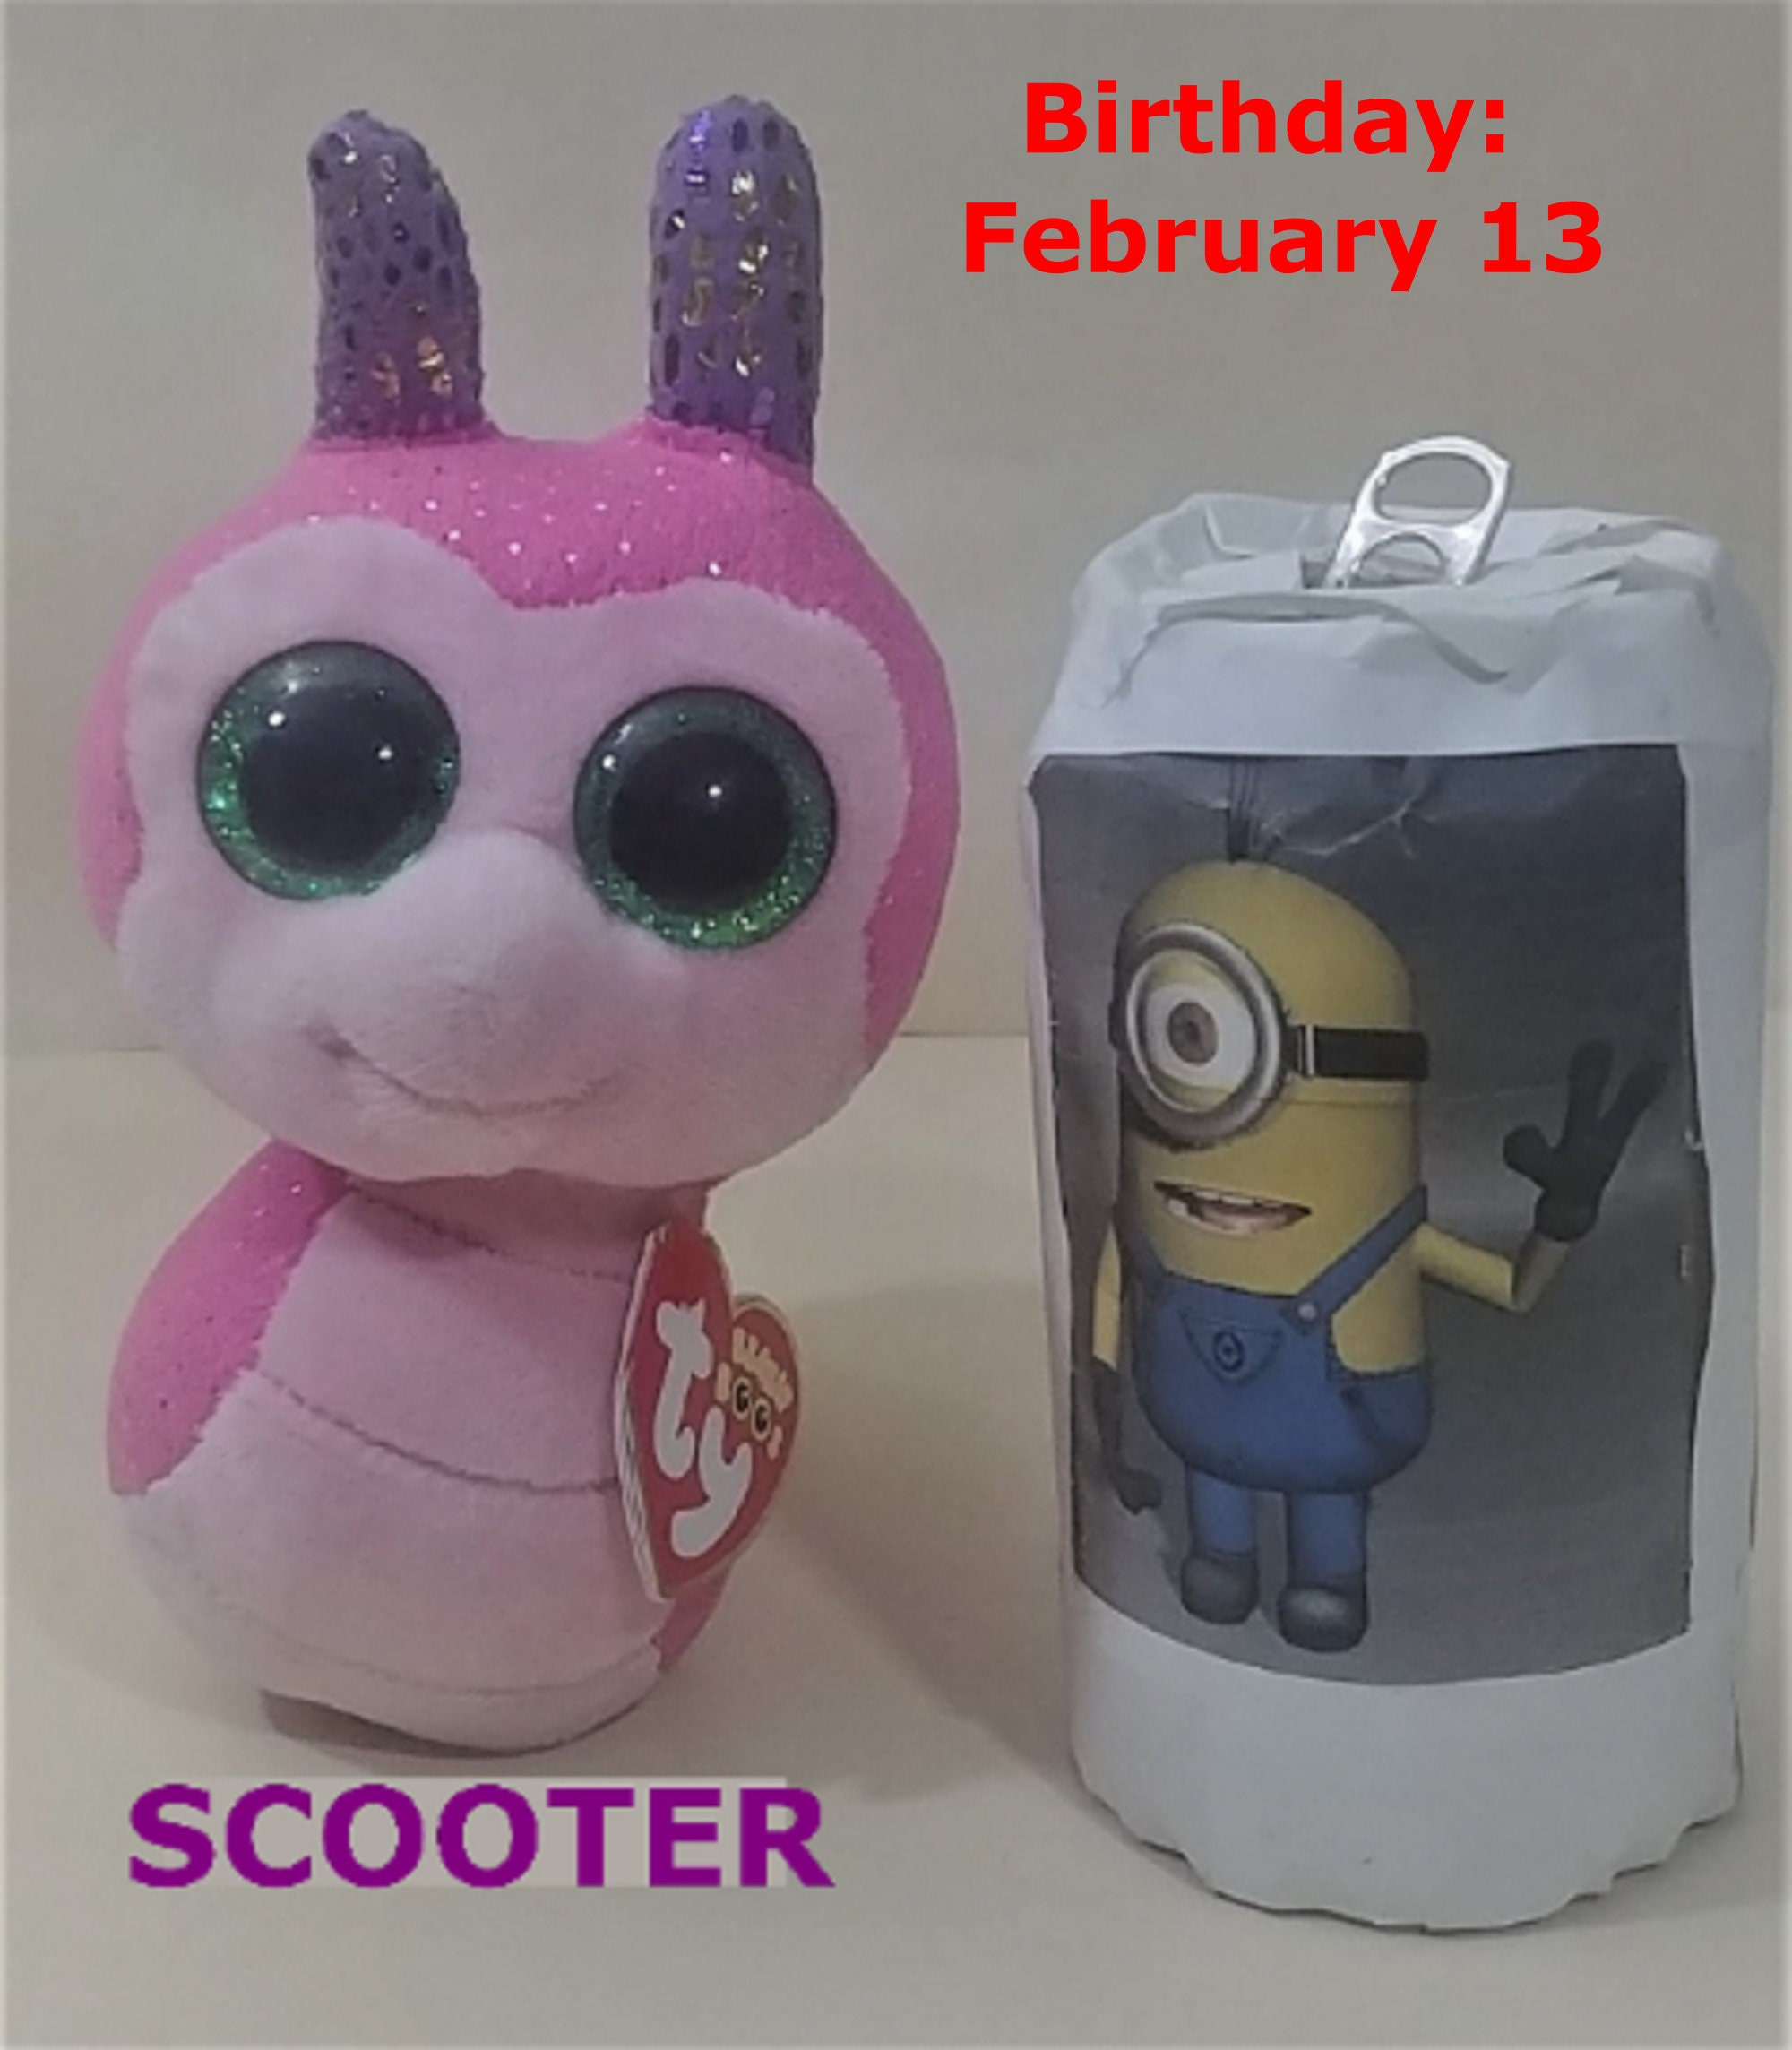 6 Inch NEW MWMT Ty Beanie Boos ~ SCOOTER the Pink Snail 